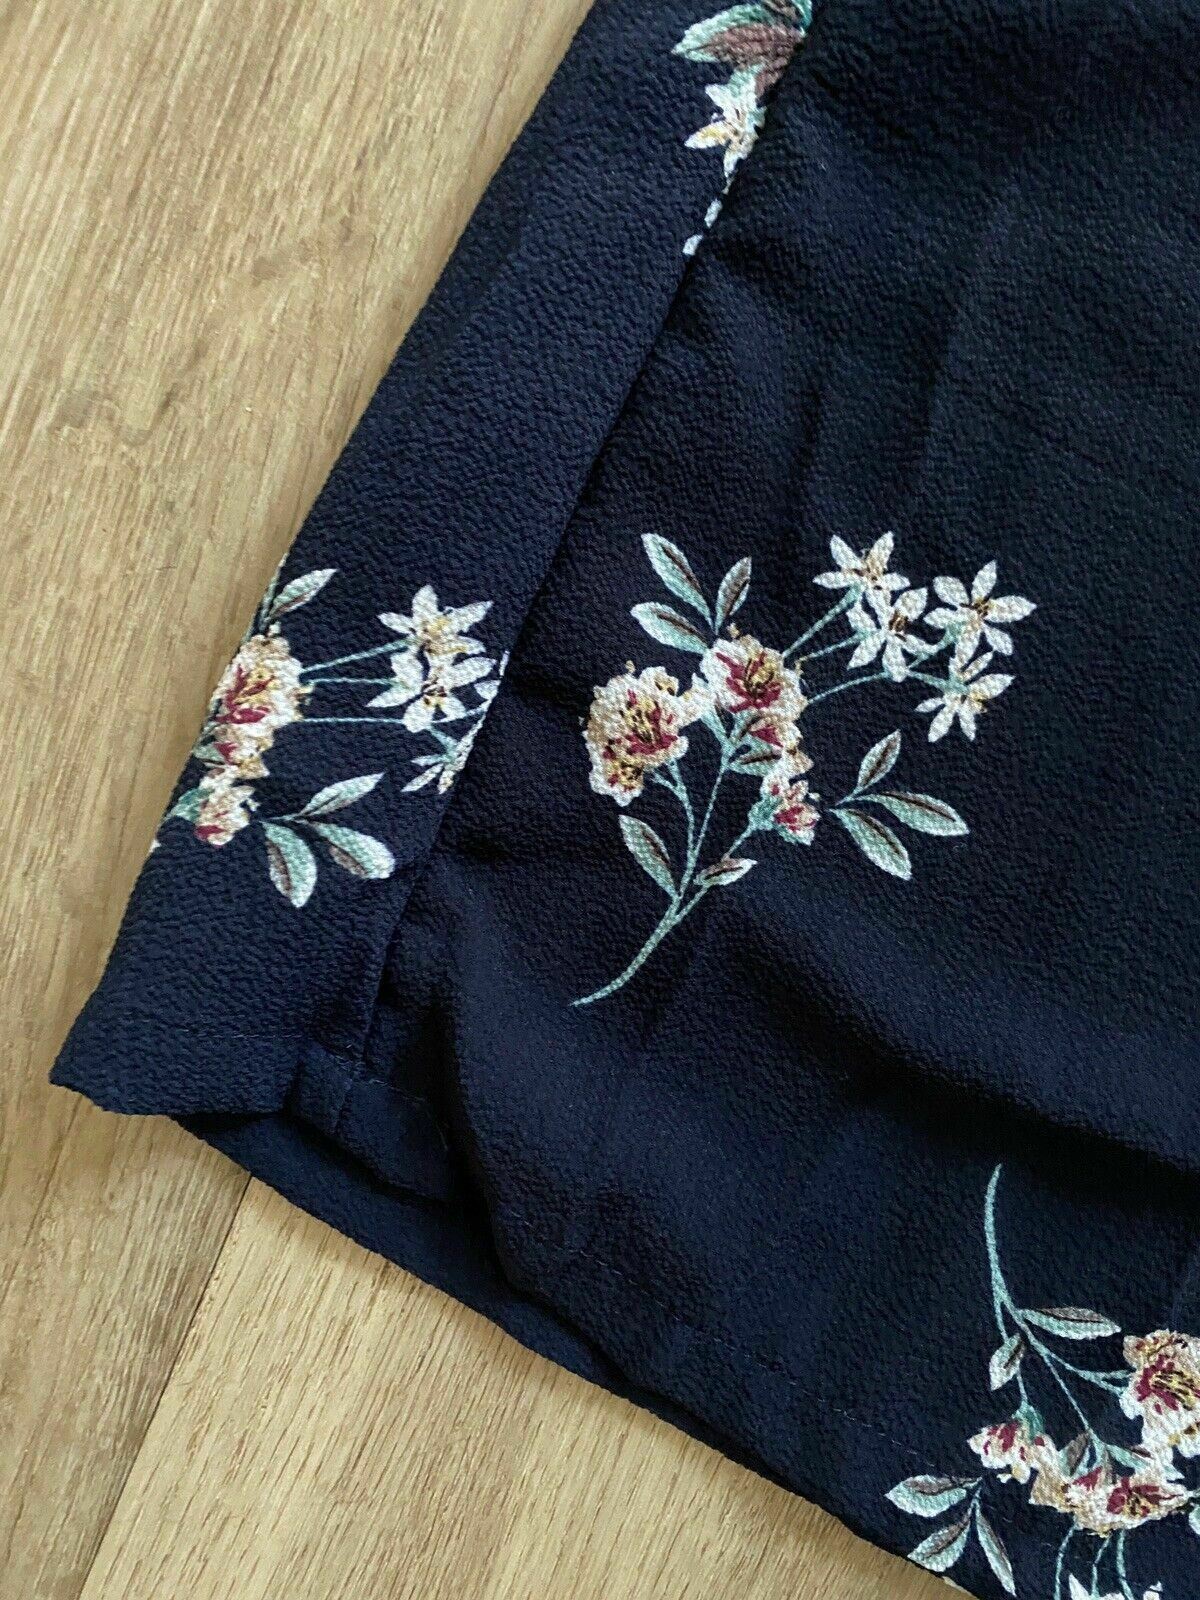 Missguided Dark Blue Floral Wide Leg Trousers Size 12